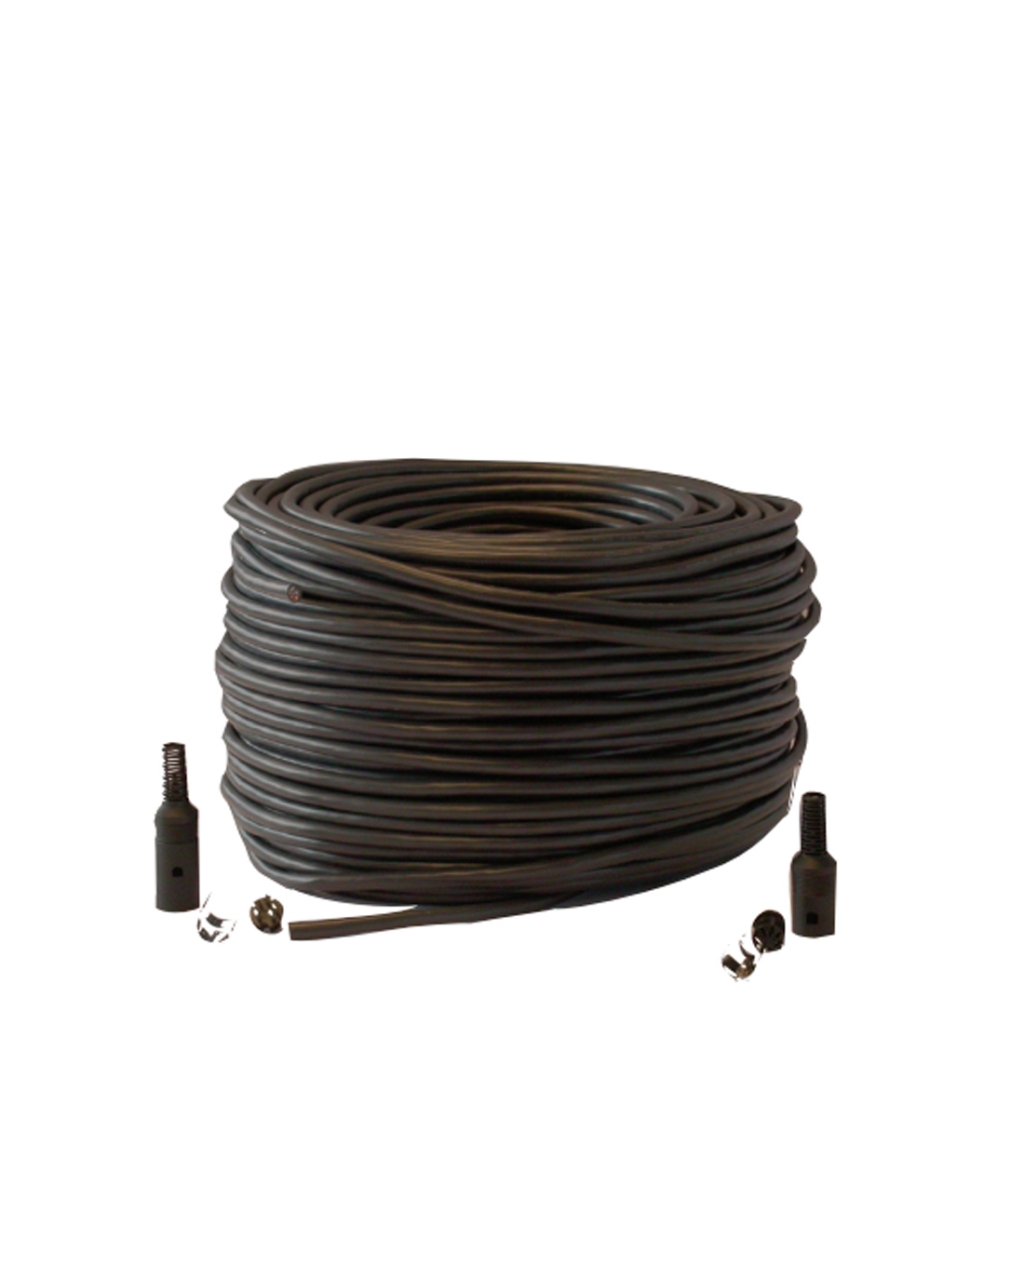 LBB 4116/00 DCN installation Cable 100 Meter